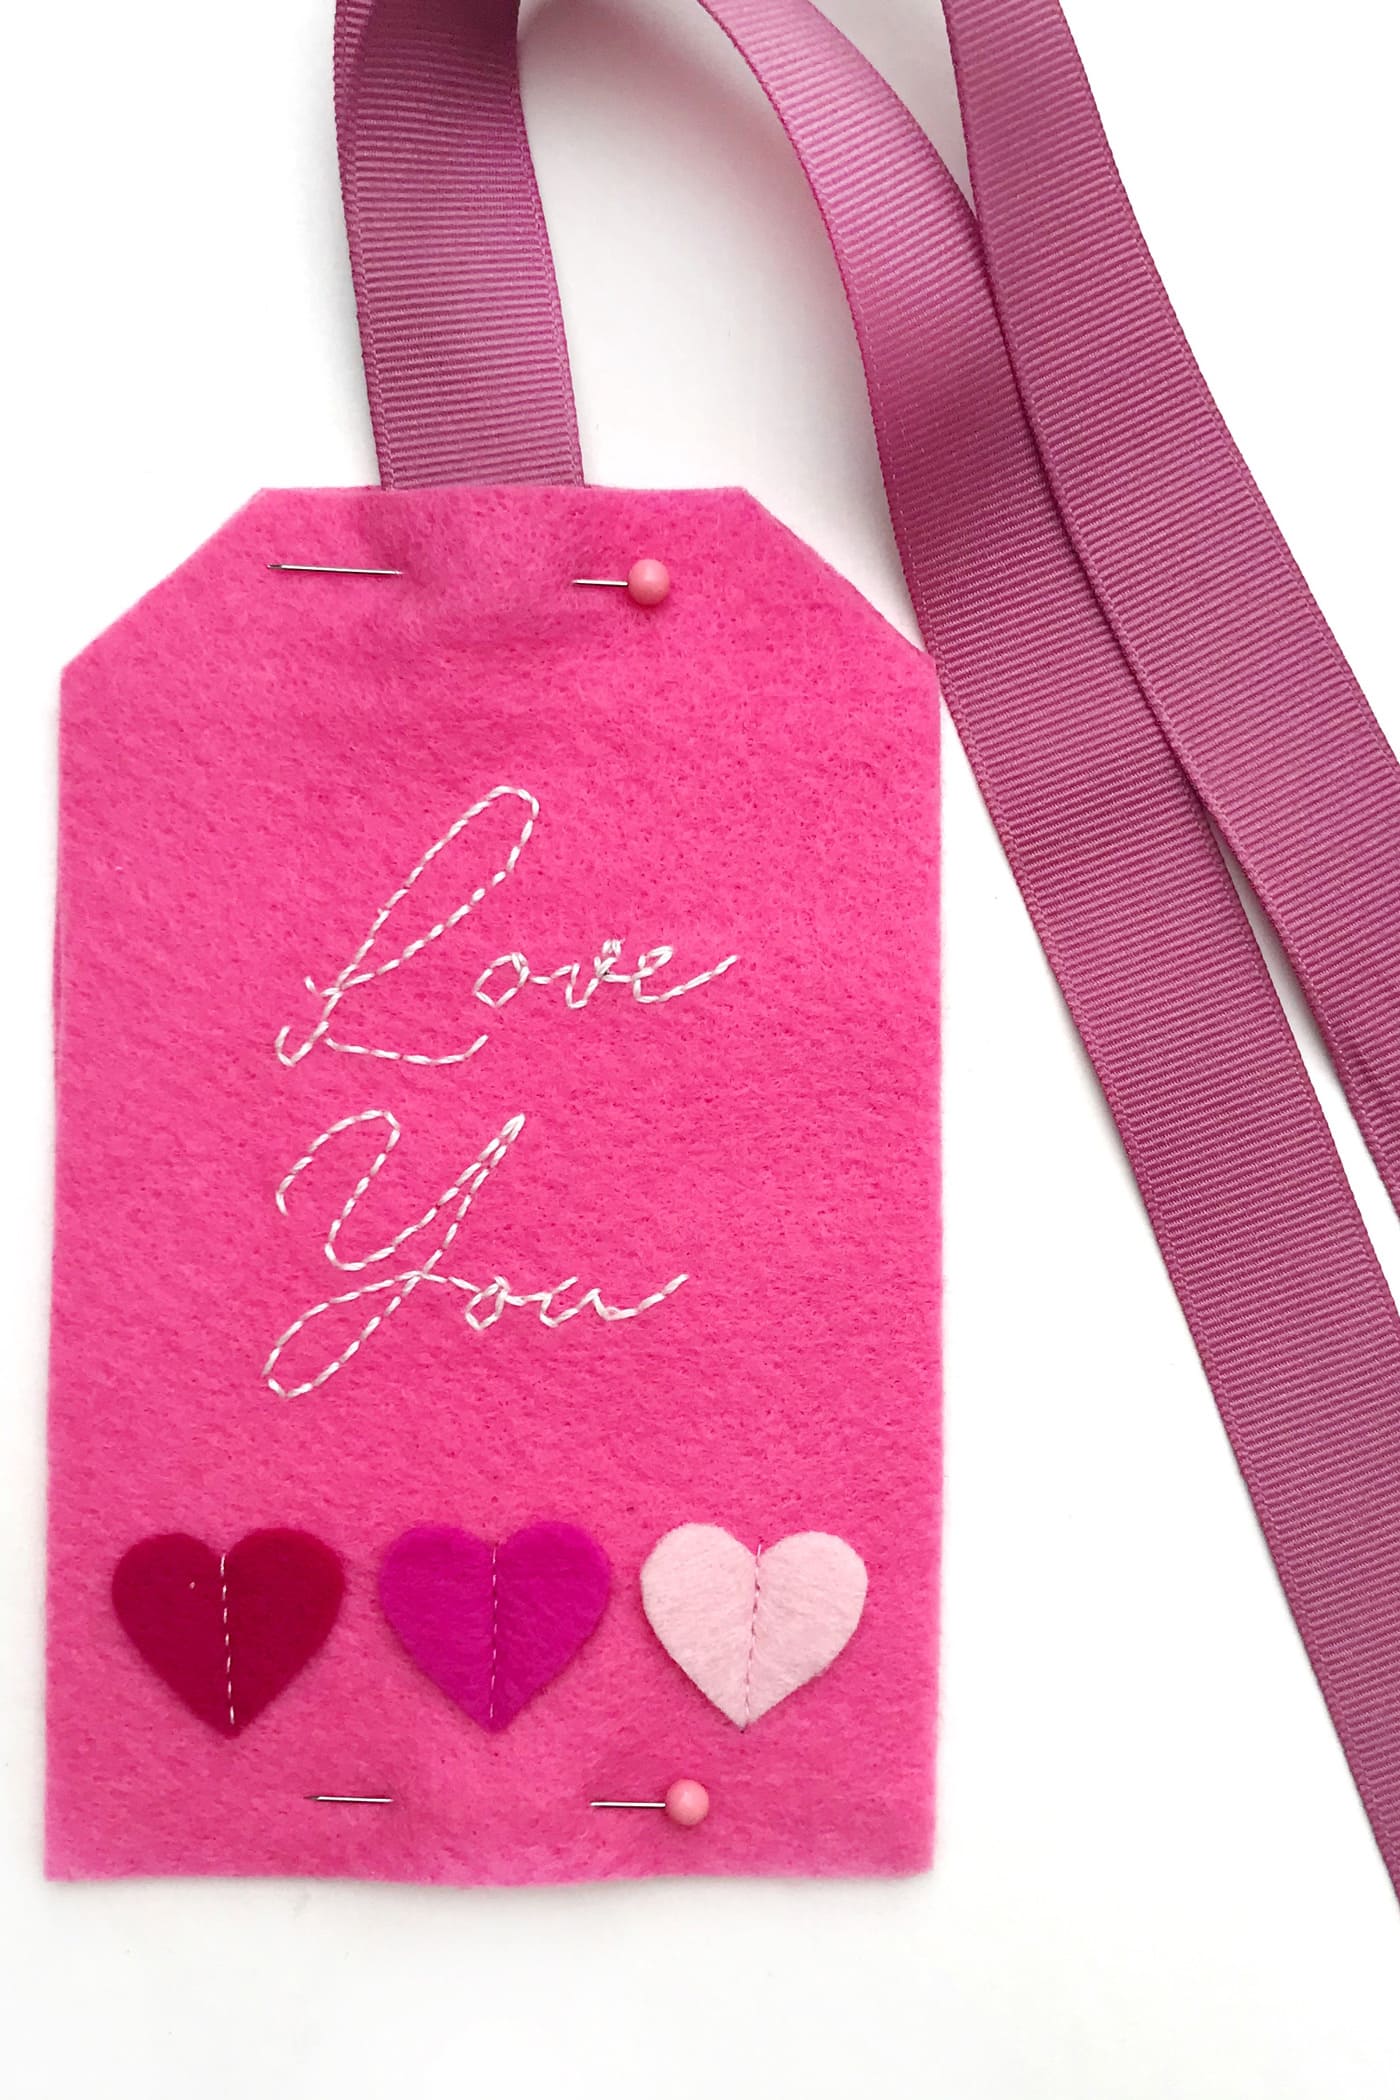 hand embroidered felt gift tags on white table showing ribbon attachment process